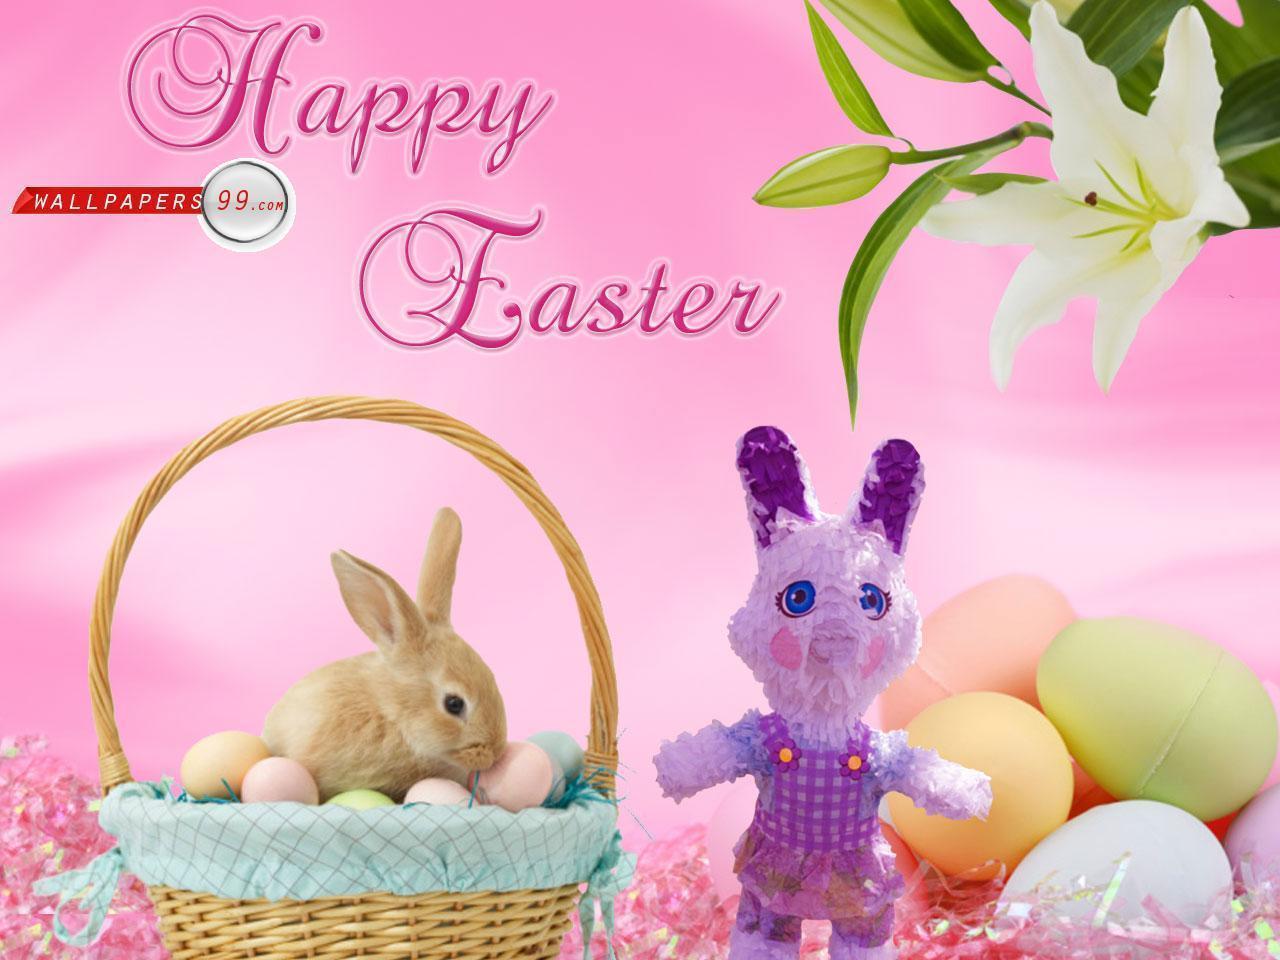 Happy Easter Wallpaper Picture Image 1280x960 35605